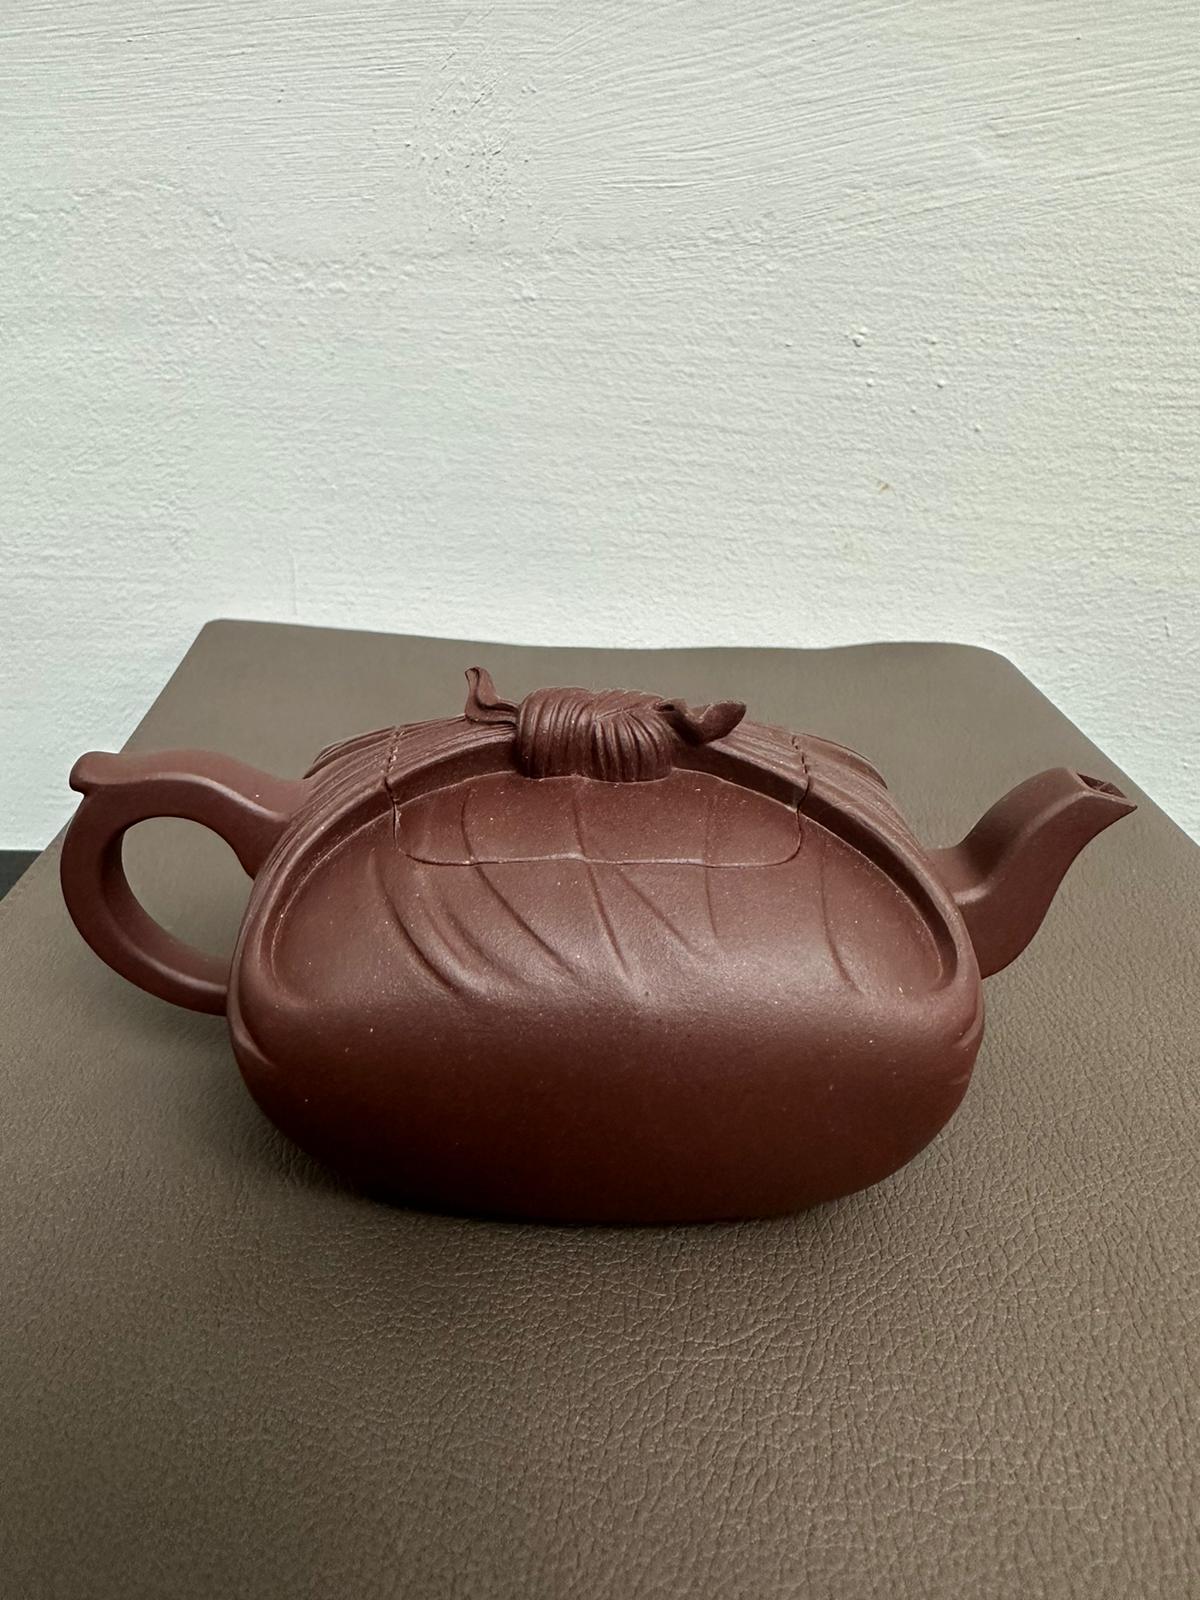 Ming Yuan Yin Bao 鸣远印包, crafted from Nationally-Authenticated True 4th Quarry DiCaoQing 国家验证四号井底槽青, Huang Long Yuan certification, by our L4 Assoc Master Yang Quan Sheng 杨全胜。Special Order for Ms Hallie and Mr Jordan.